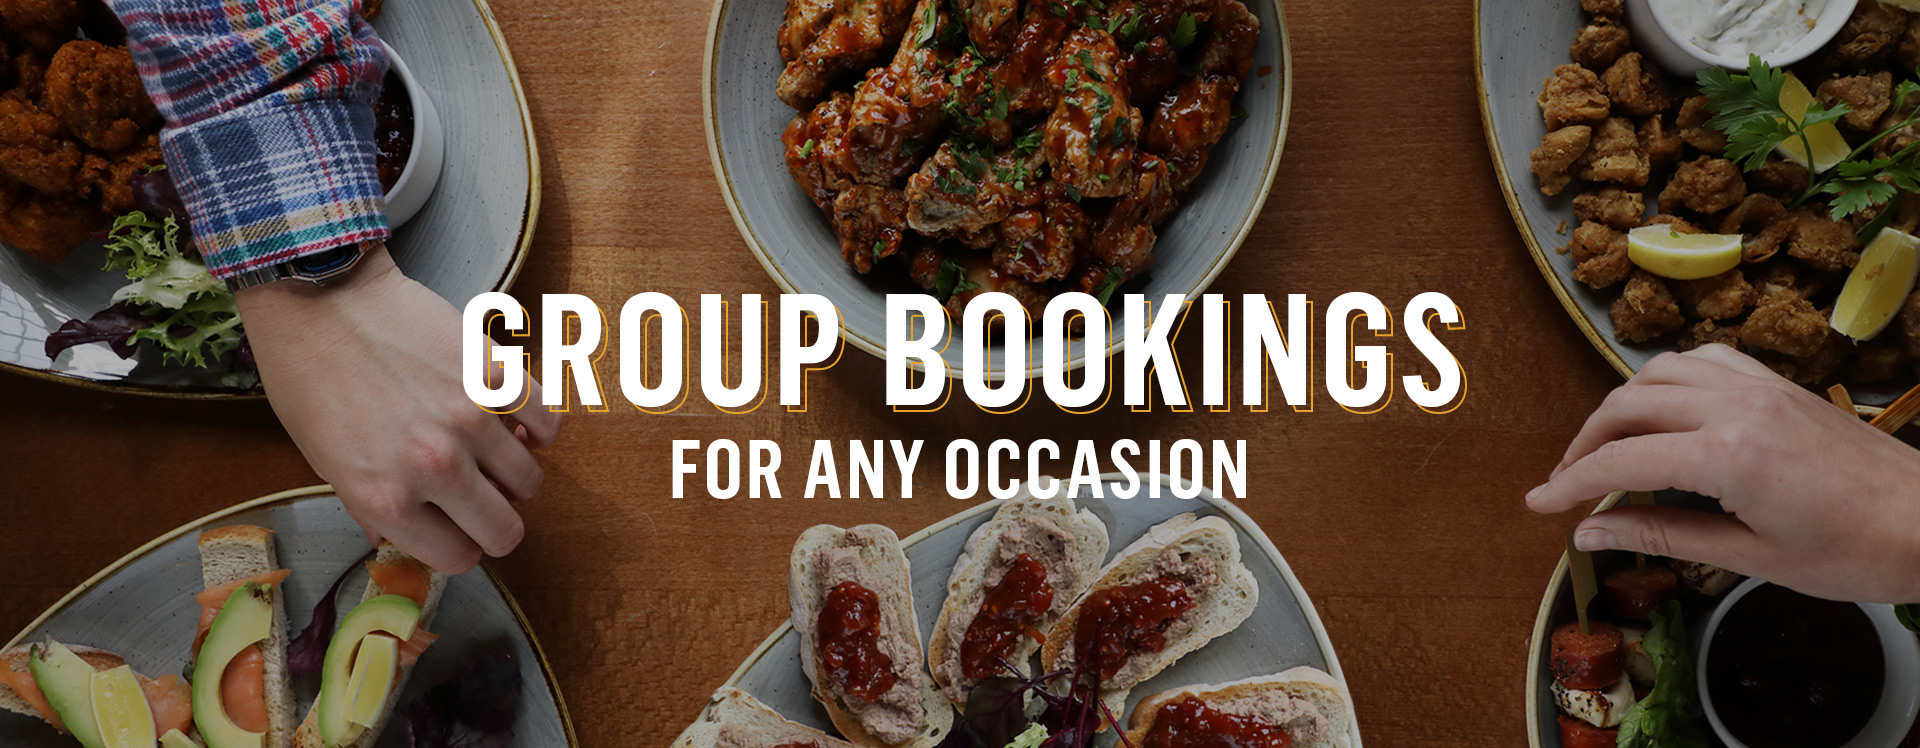 Group Bookings at The Coal Hole